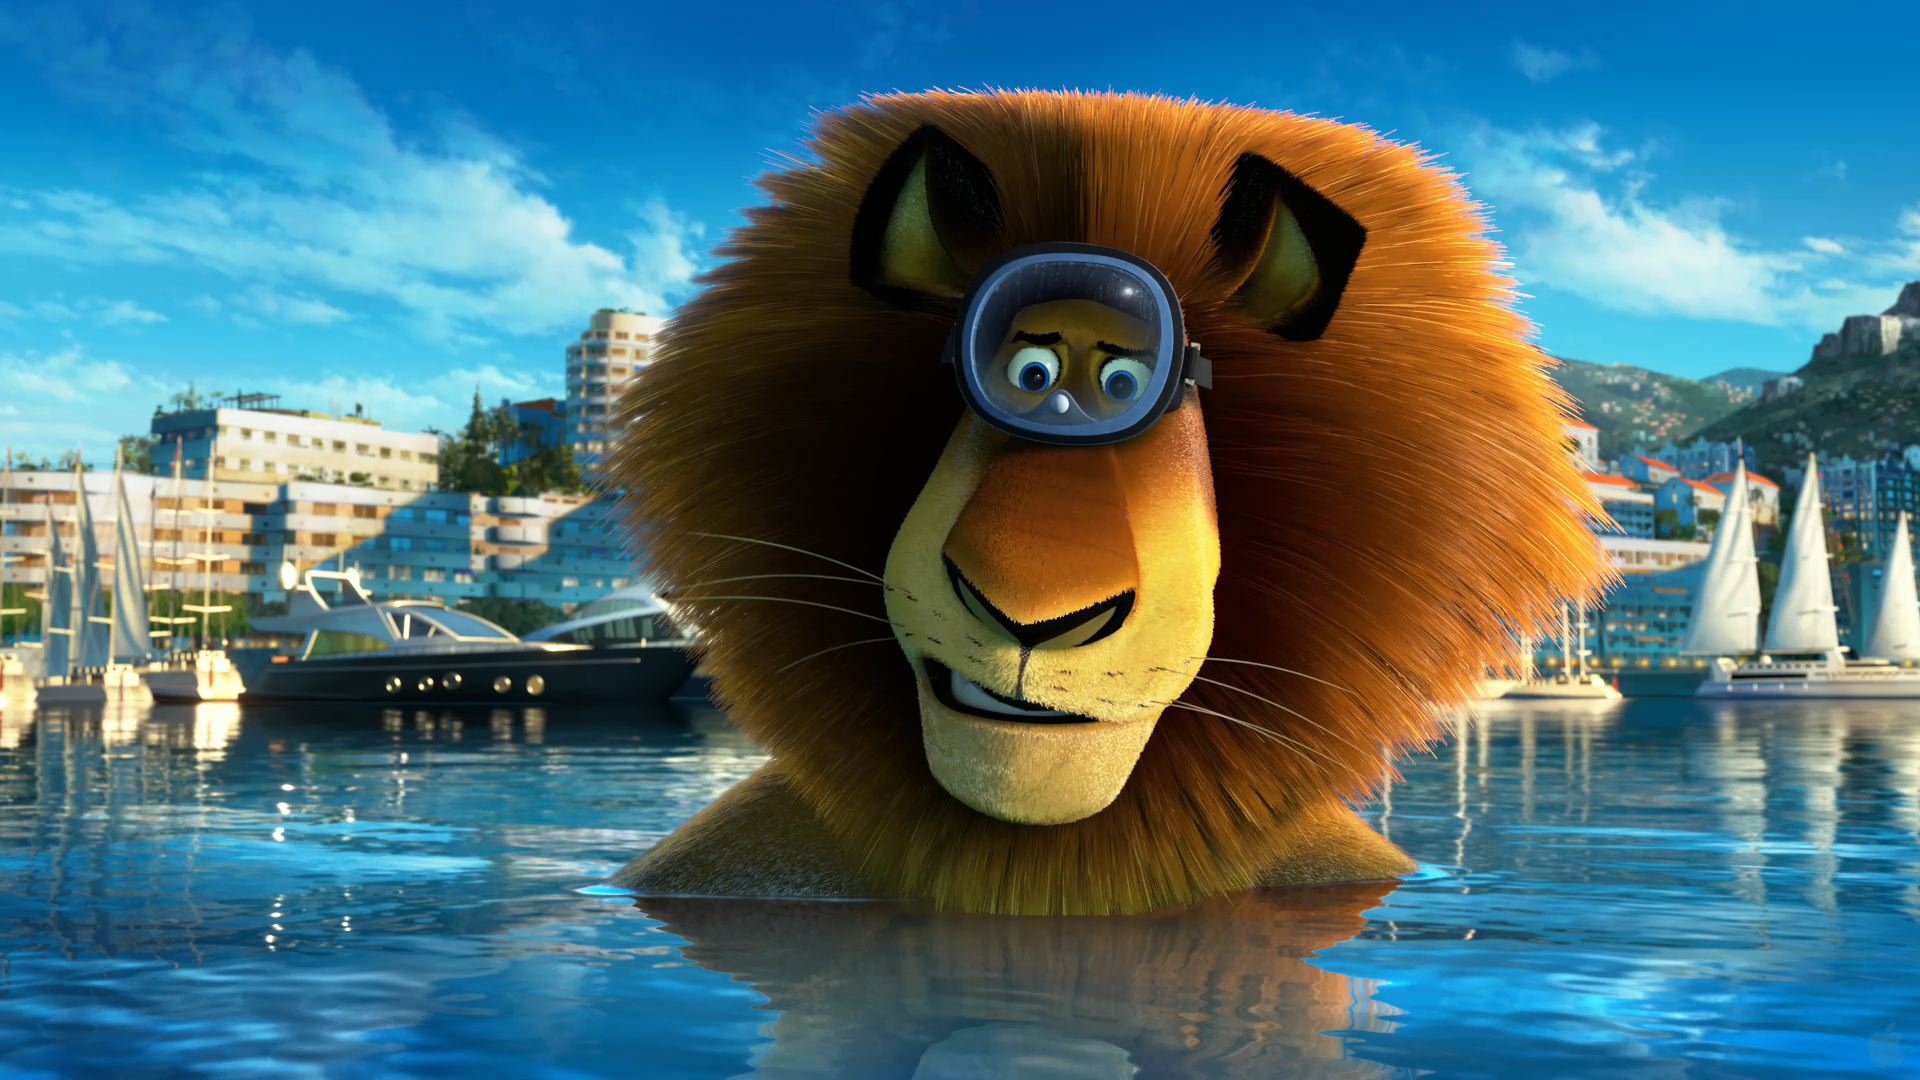 HD Wallpaper Madagascar Europe S Most Wanted